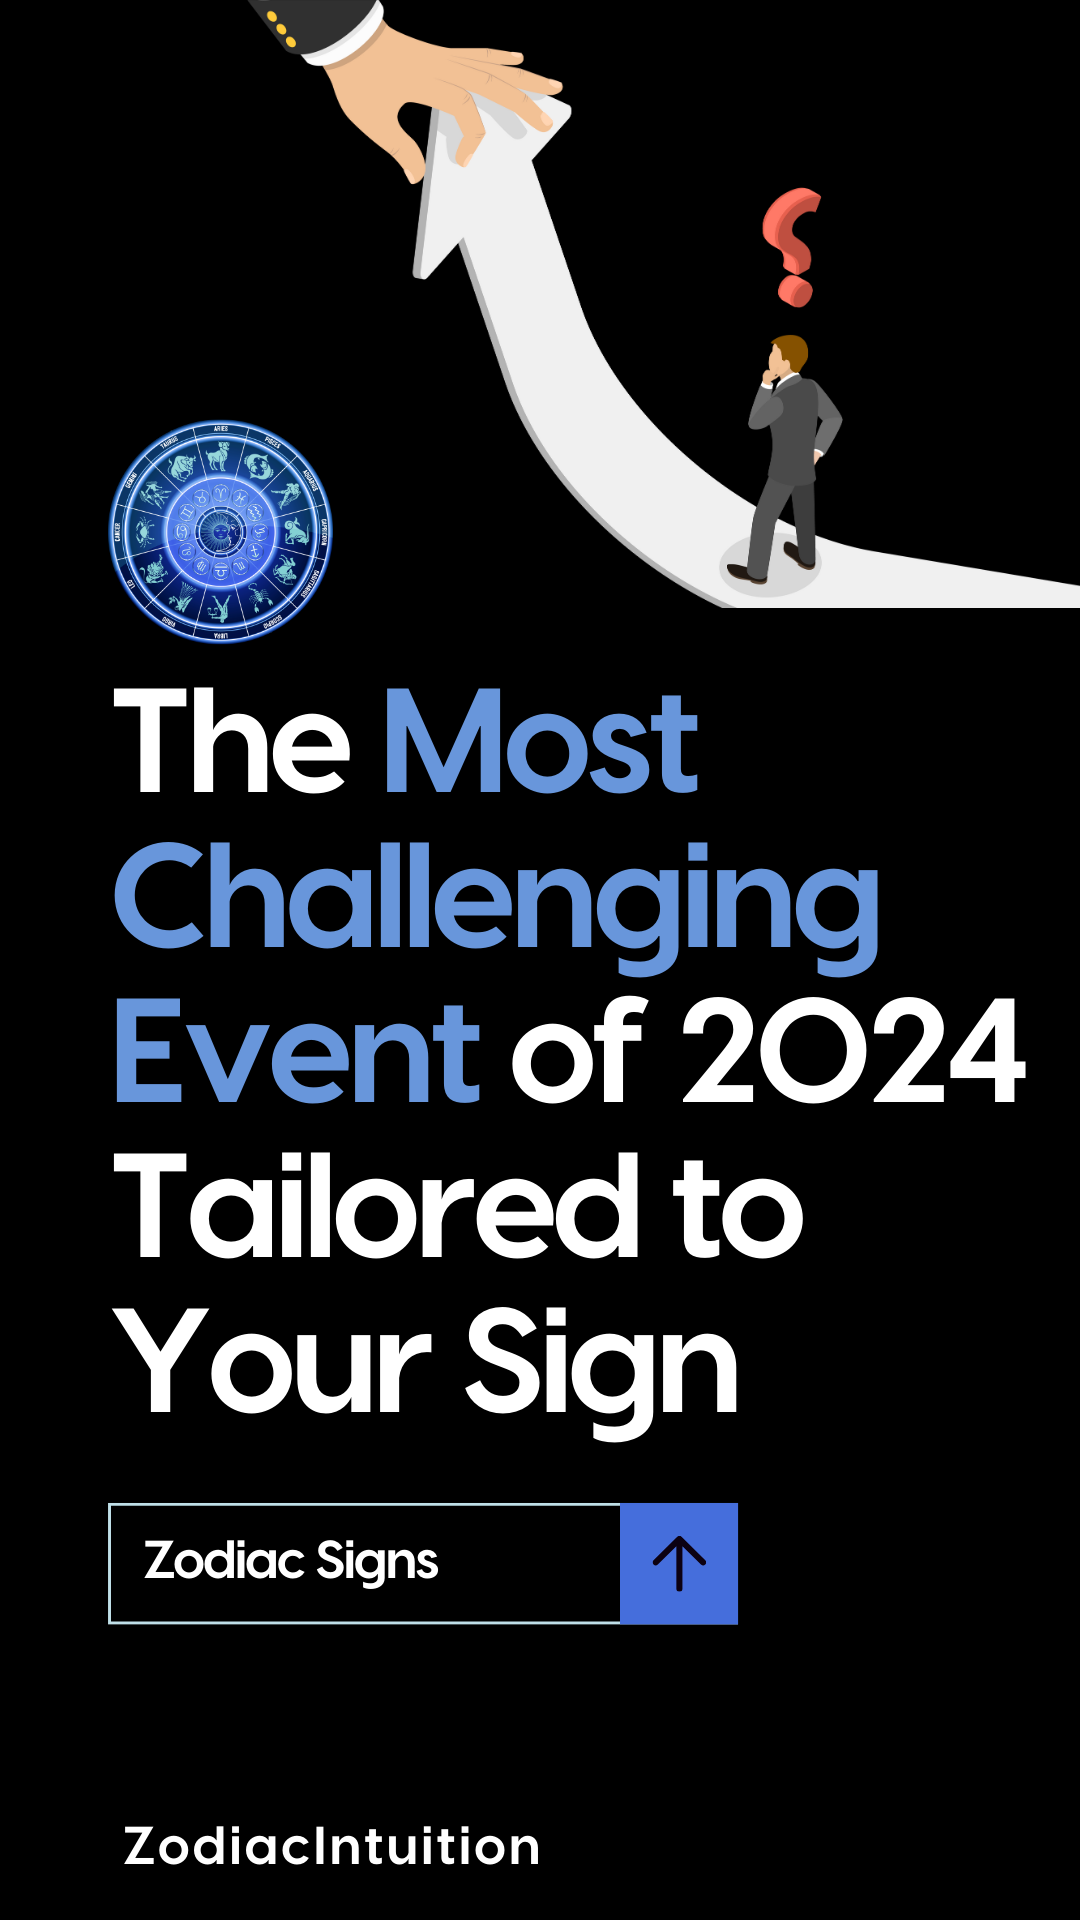 The Most Challenging Event of 2024 Tailored to Your Sign